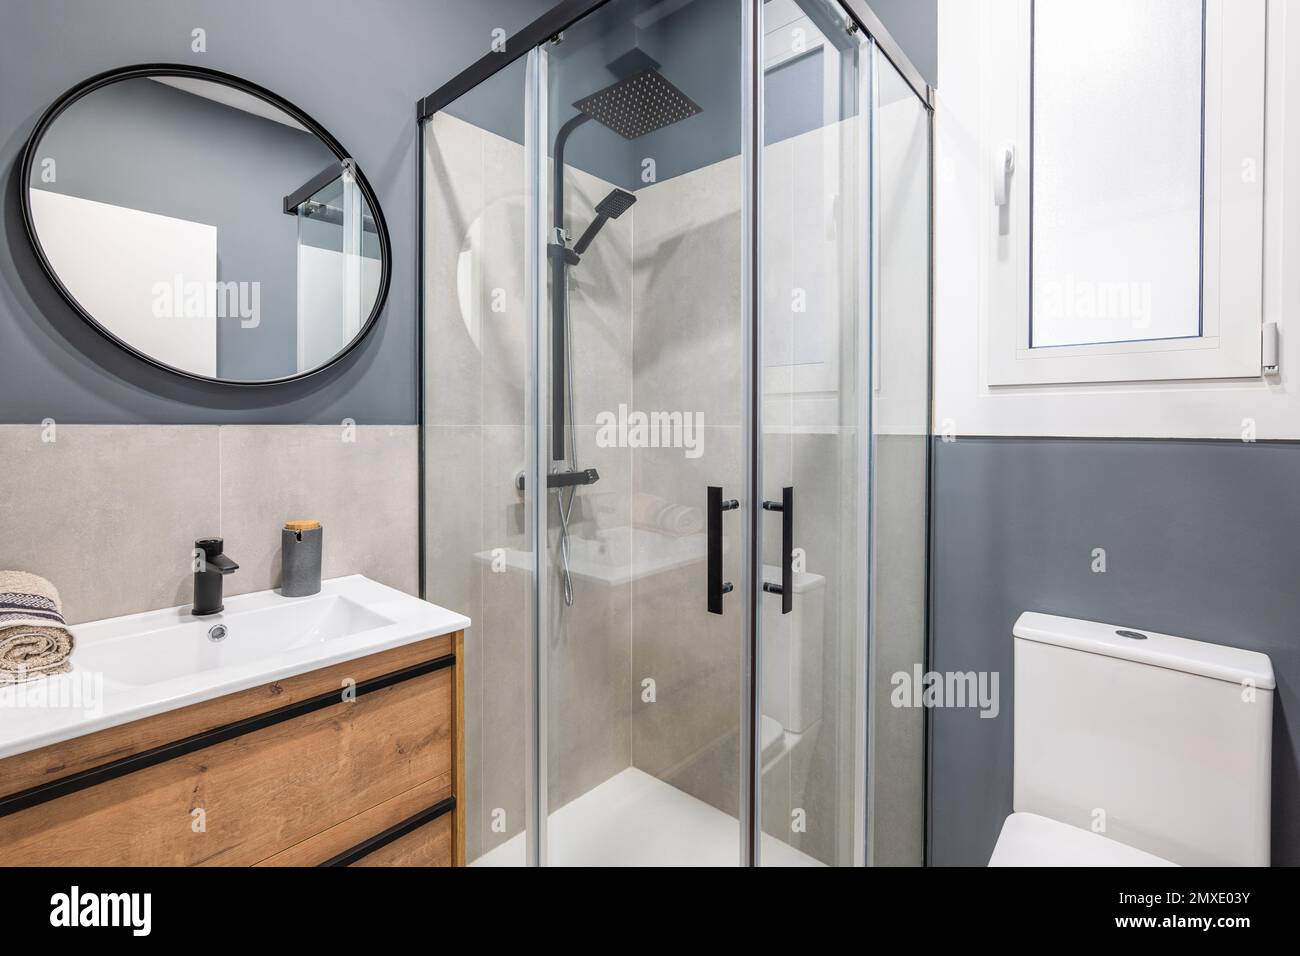 https://c8.alamy.com/comp/2MXE03Y/bathroom-in-a-modern-style-with-high-quality-design-and-expensive-fittings-gray-walls-are-in-harmony-with-black-metal-decor-daylight-enters-through-2MXE03Y.jpg